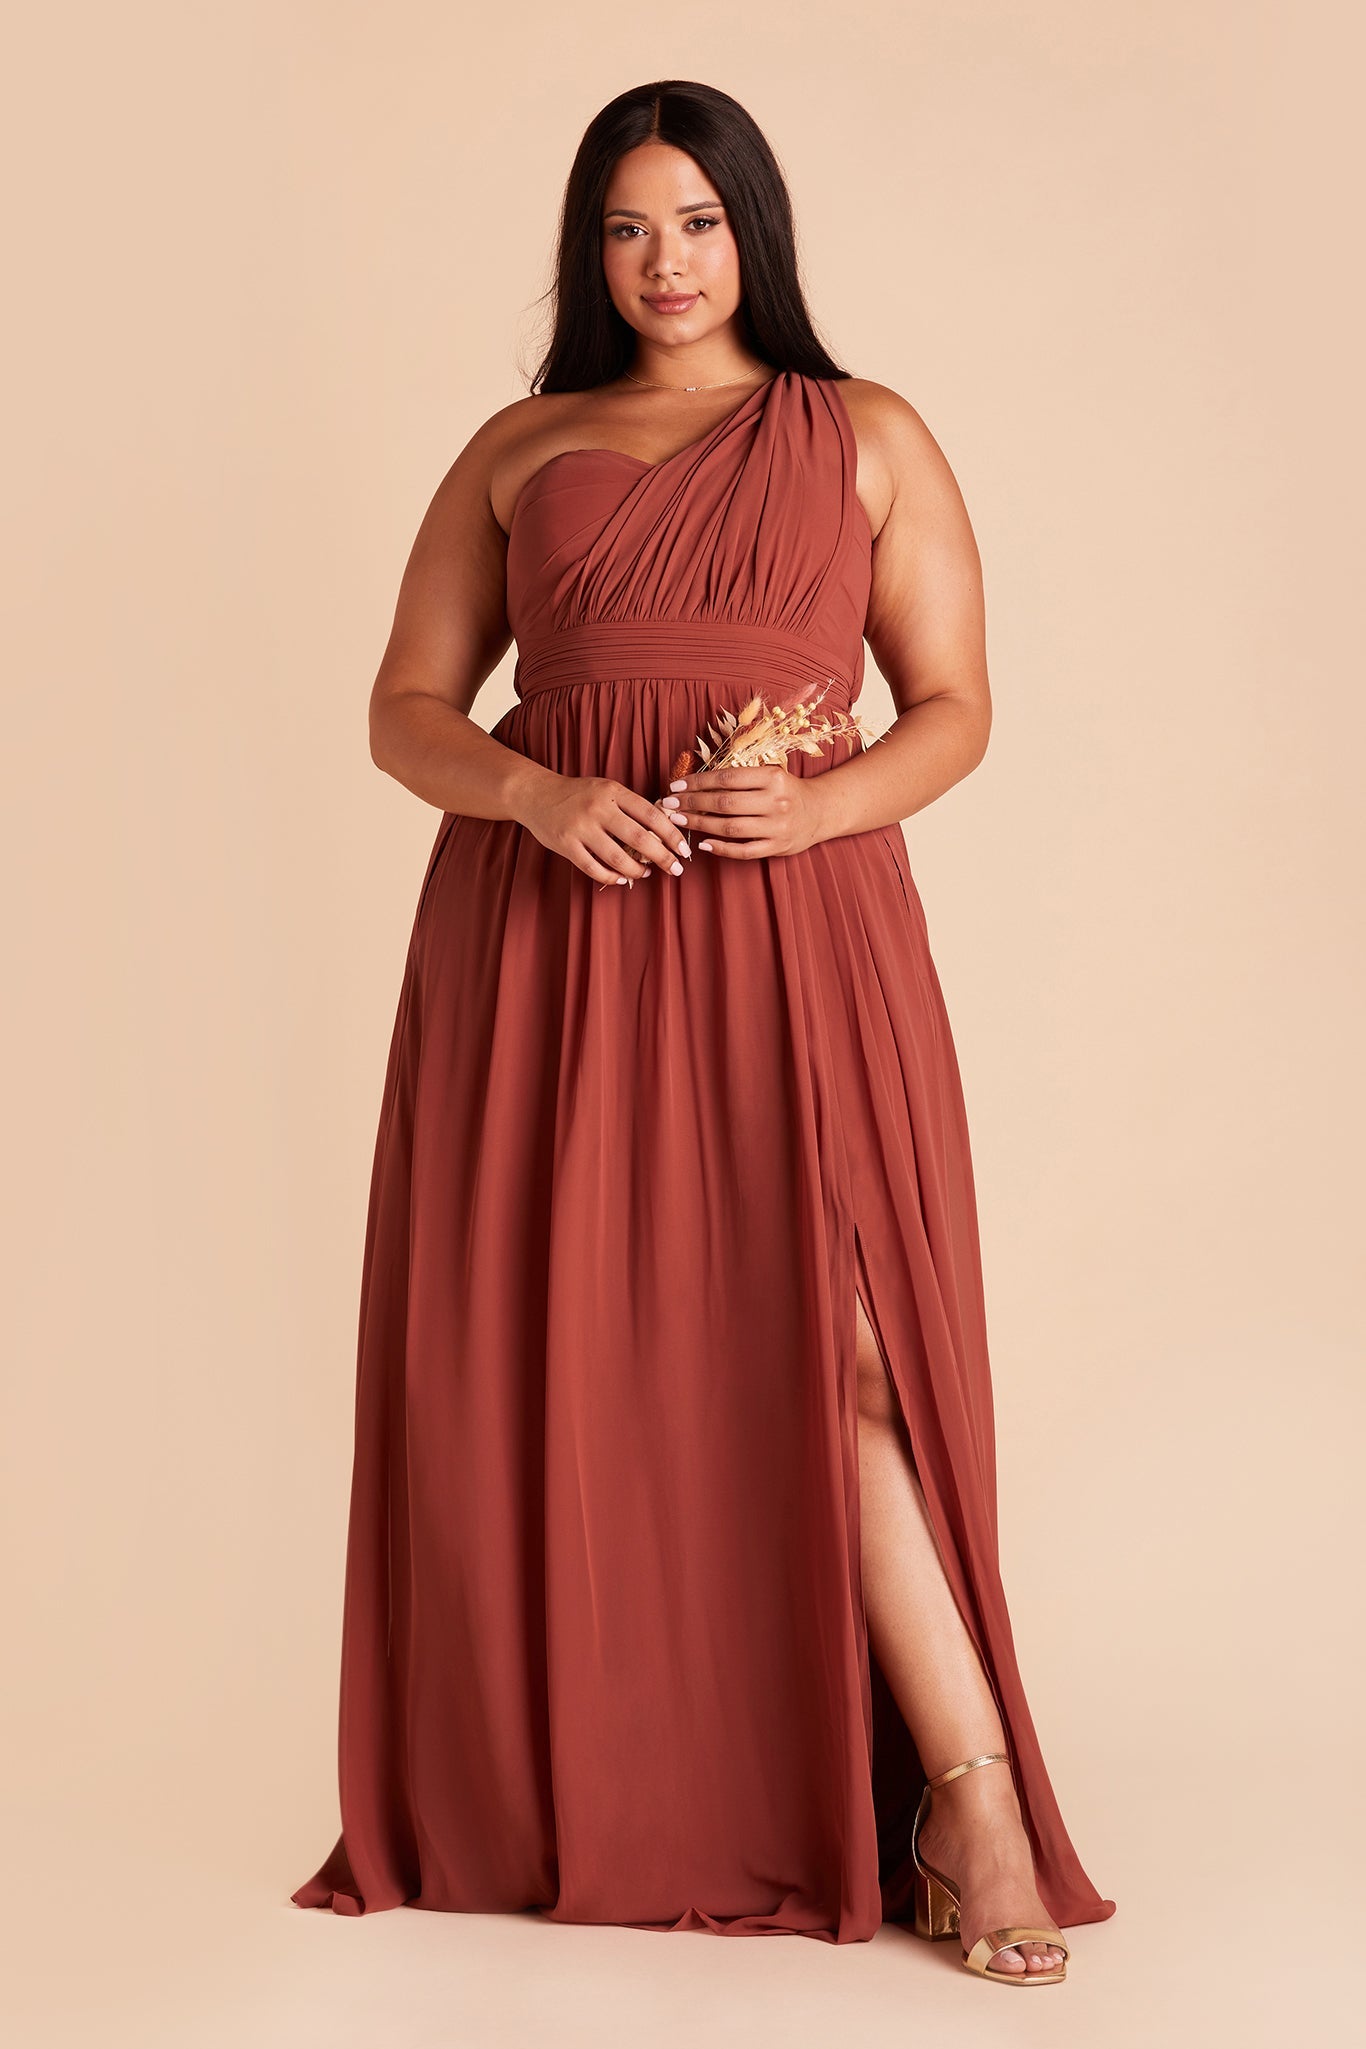 Grace convertible plus size bridesmaid dress with slit in spice chiffon by Birdy Grey, front view